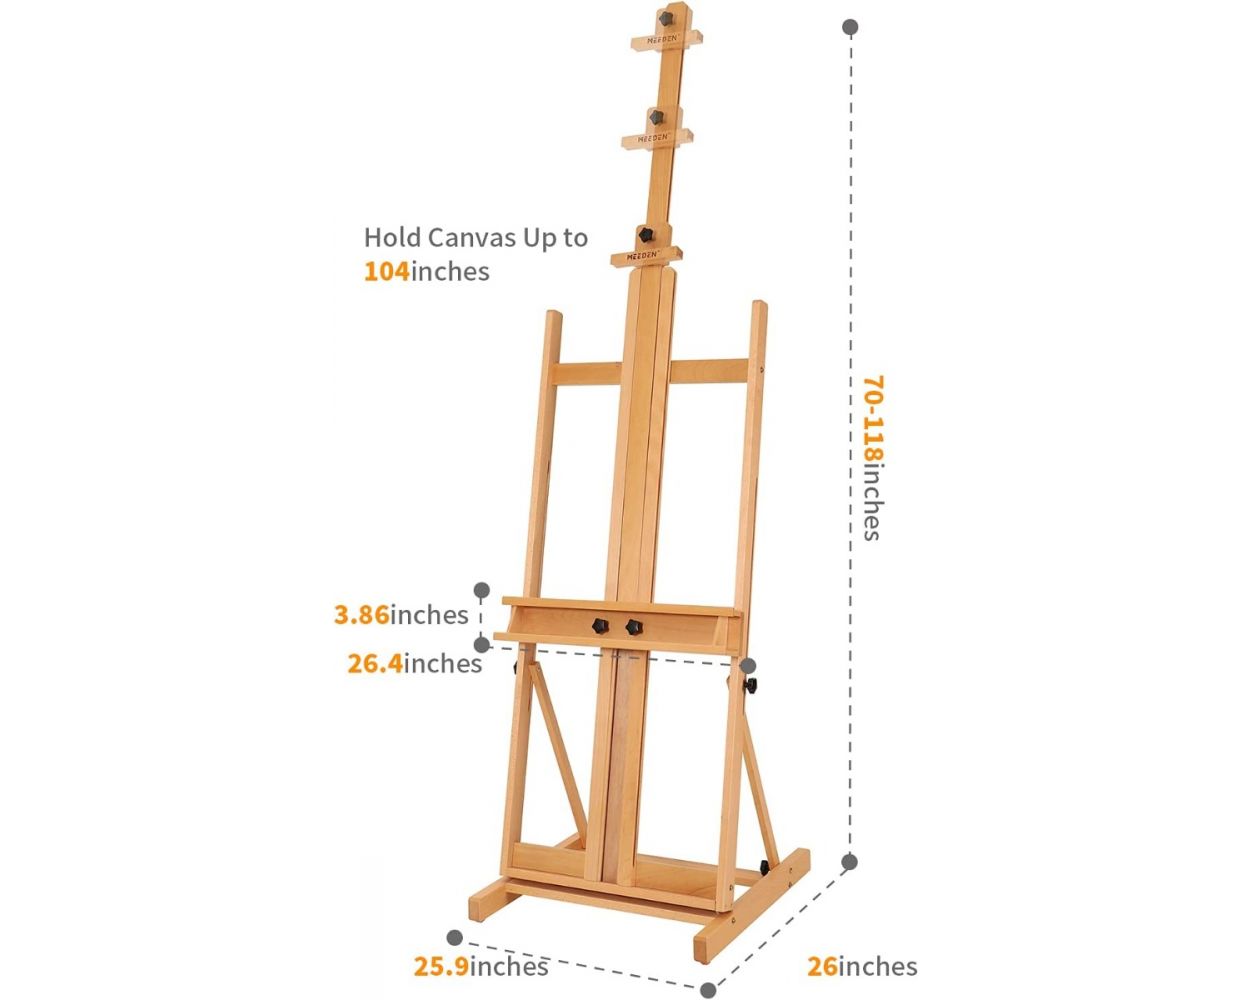  MEEDEN Wooden Easel Stand for Painting/Display